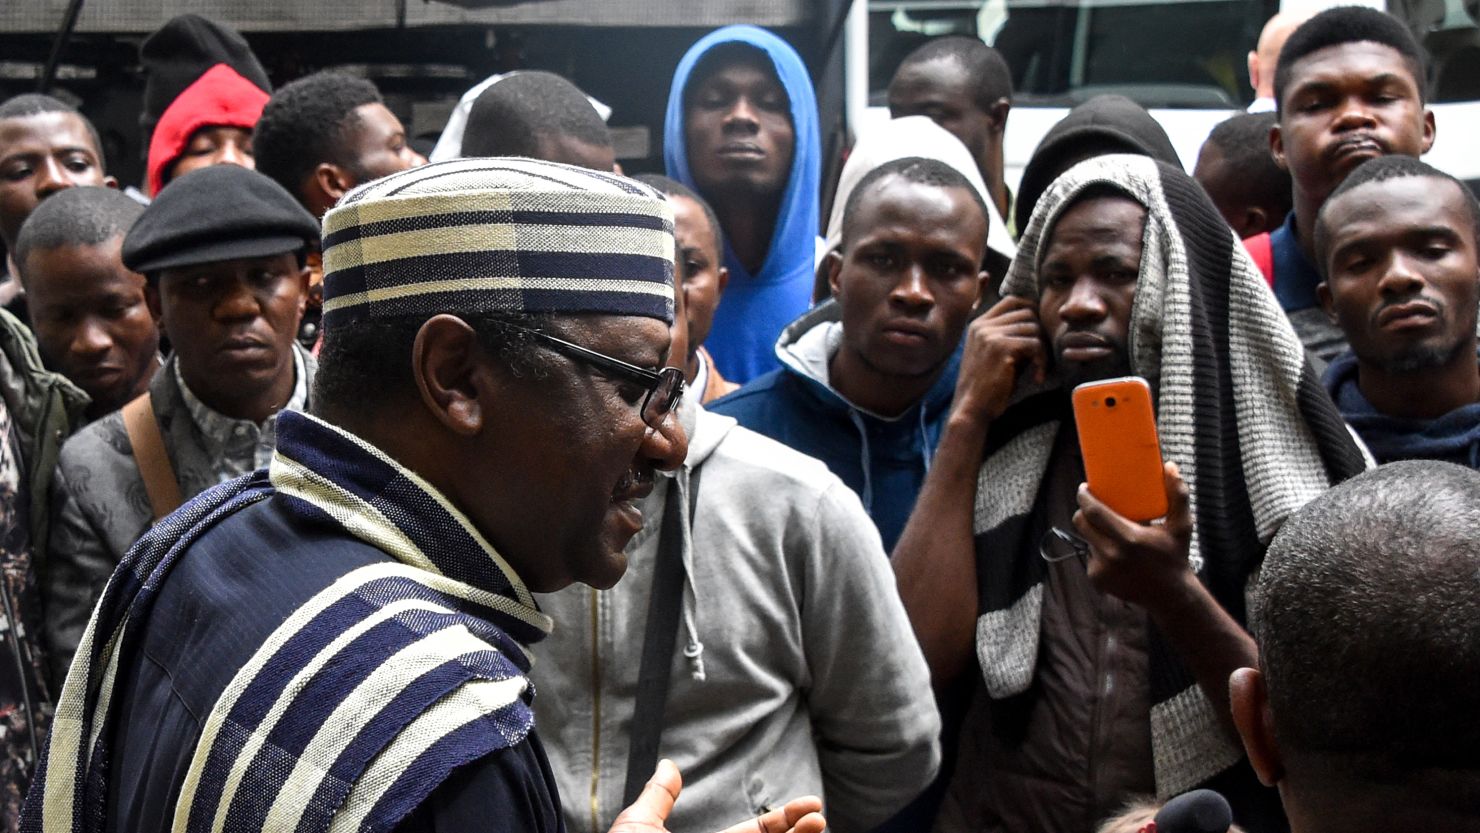 Ambassador of Nigeria to Russia Steve Davies Ugbah (L) speaks with Nigerians in front of Nigerian embassy in Moscow on July 13, 2918. Photo: VASILY MAXIMOV/AFP/Getty Images